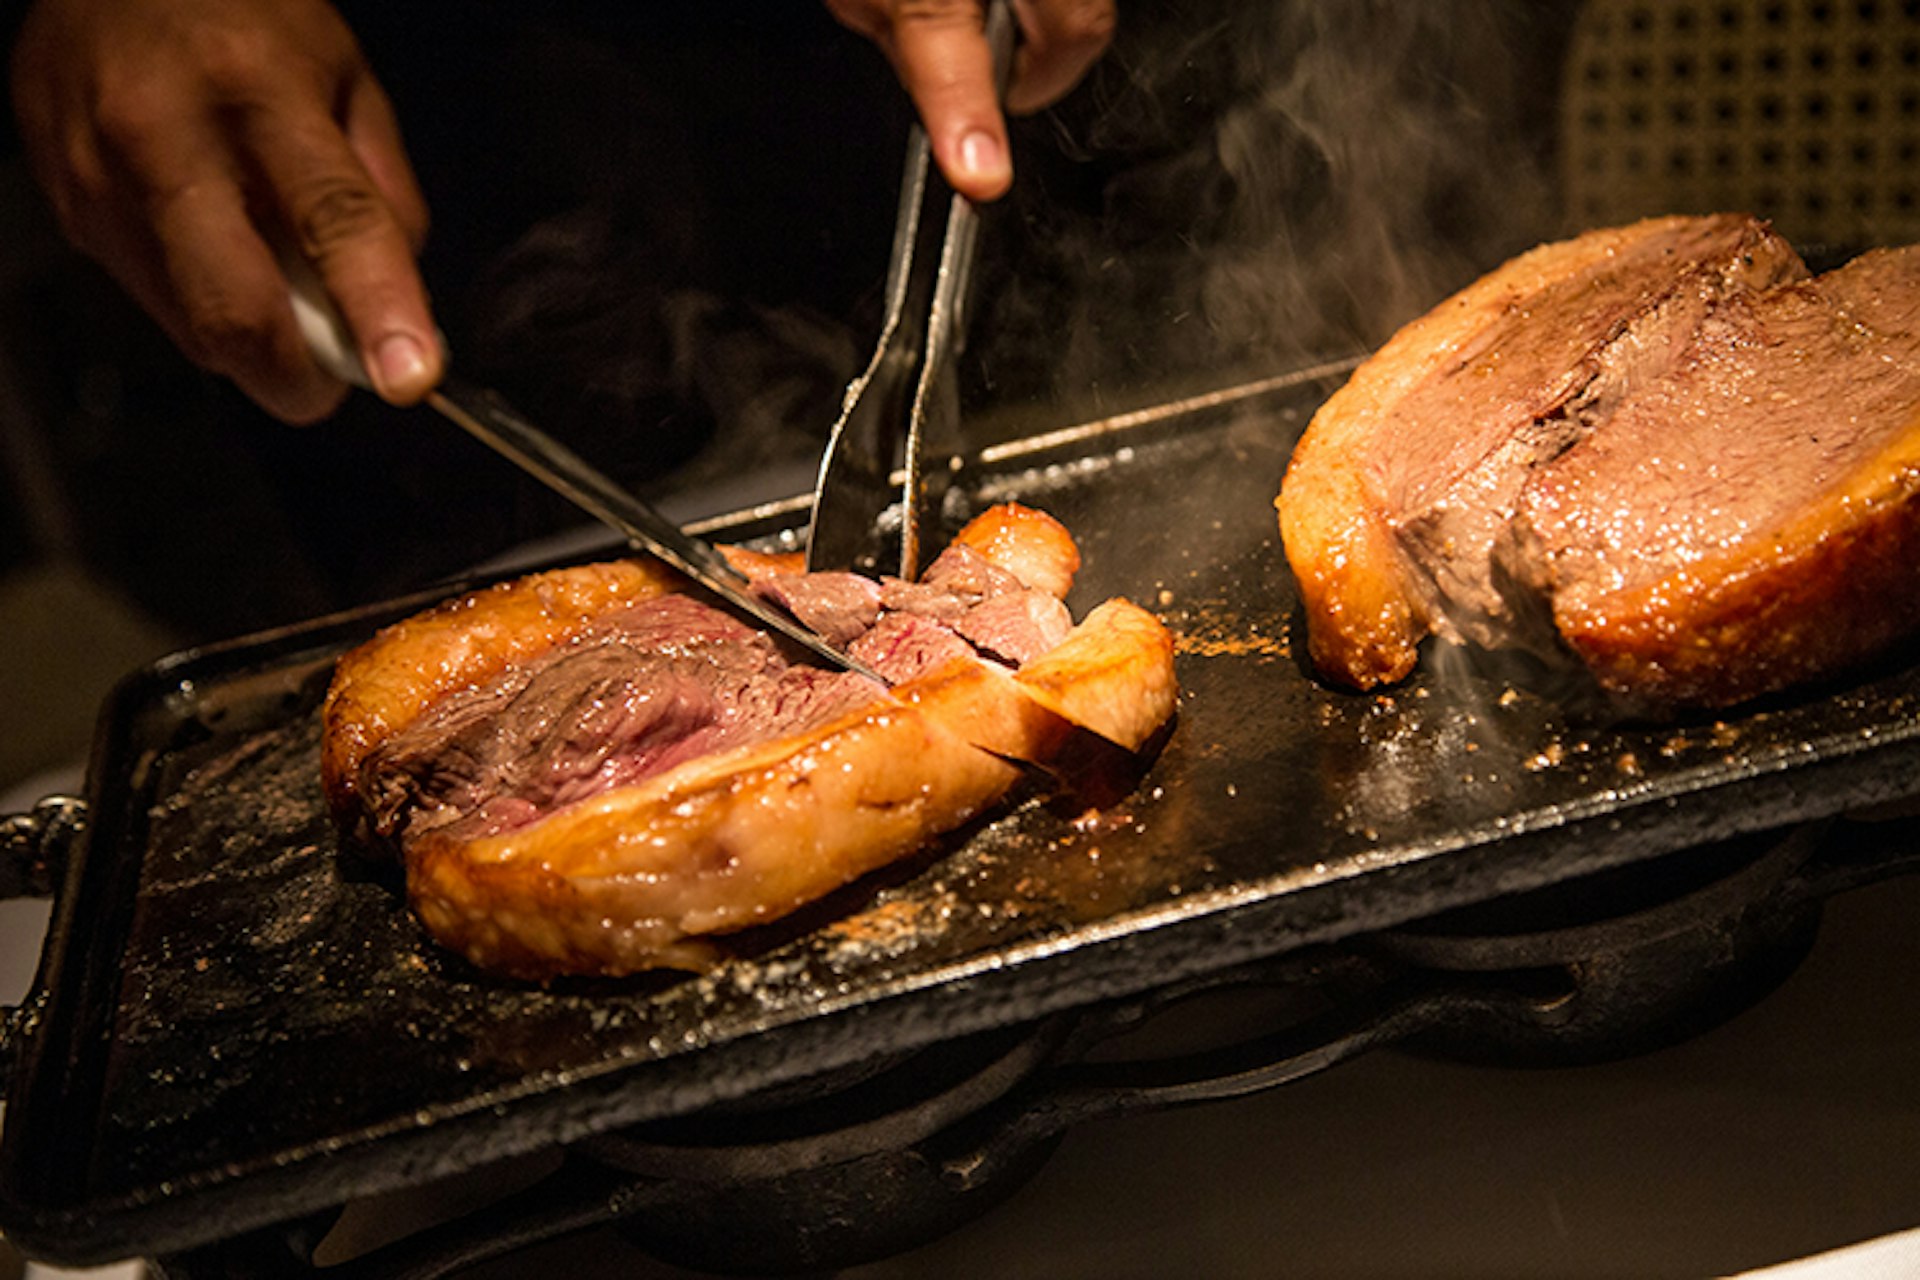 Pichana is a prime beef cut for Brazilian churrascaria. Image by Teresa Geer / Lonely Planet